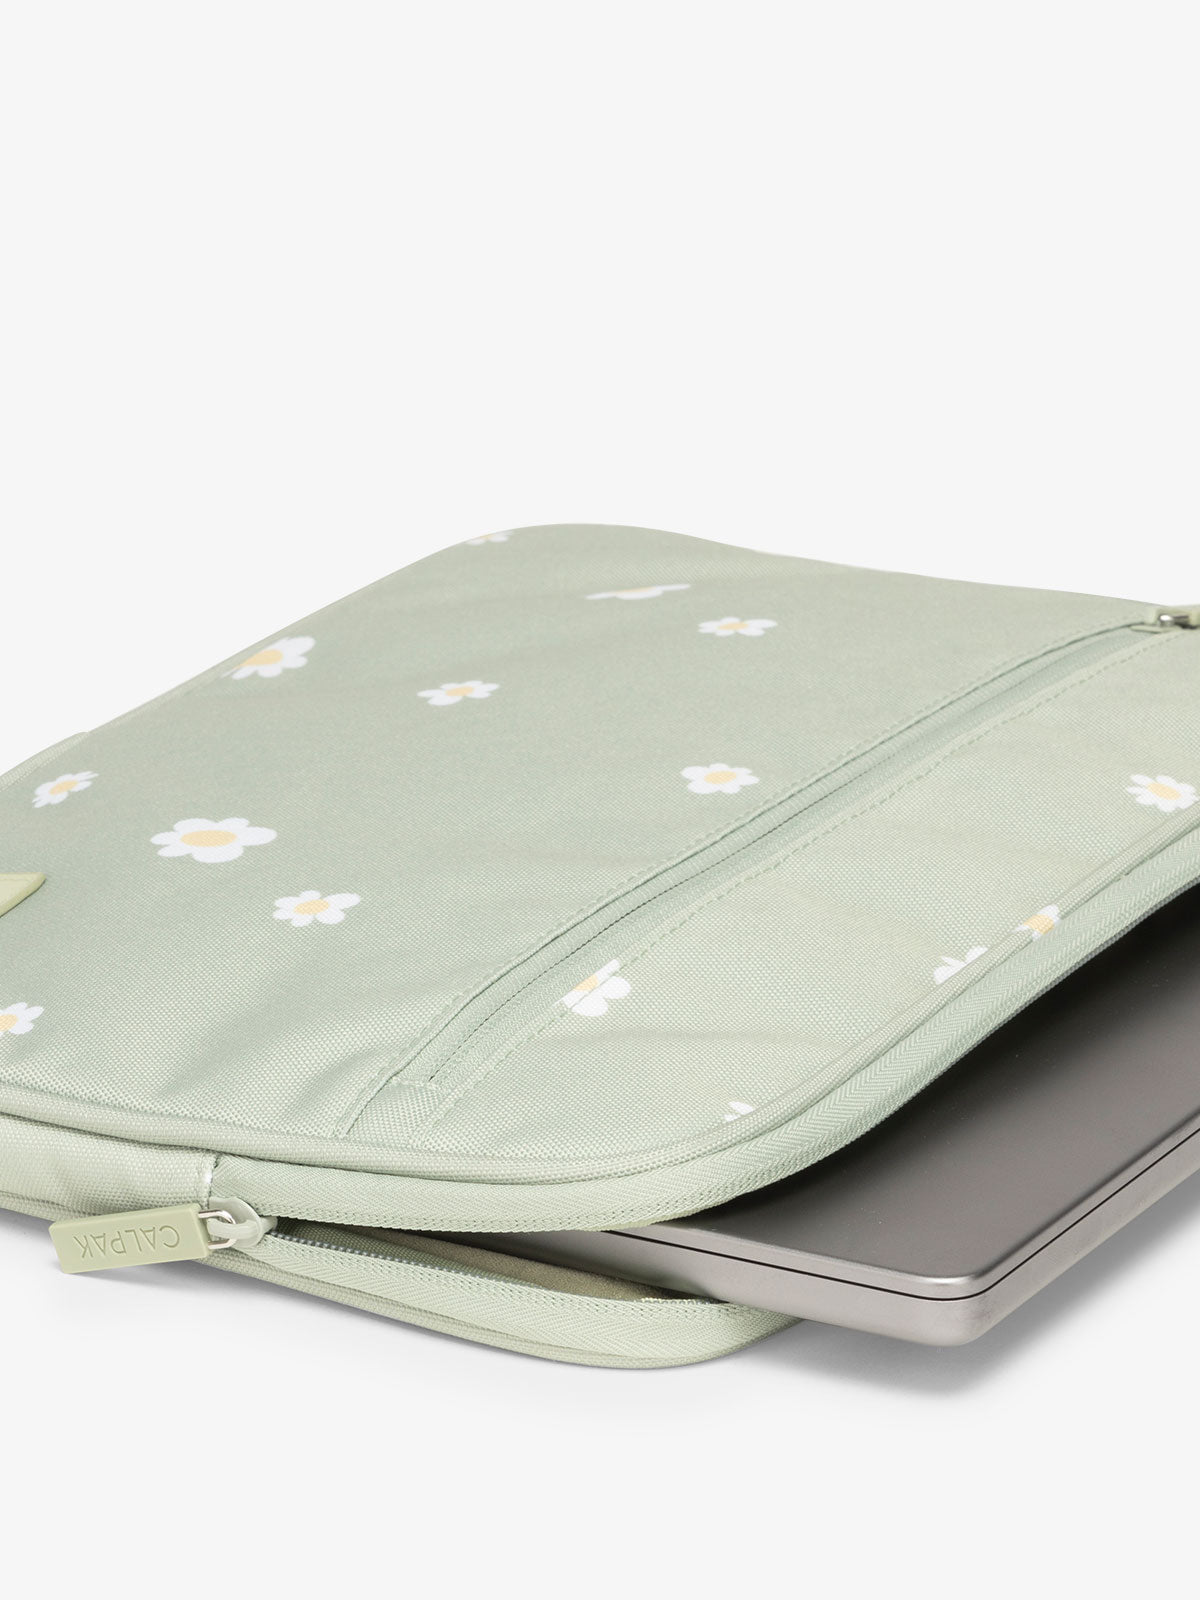 CALPAK 13-14 Inch protective Laptop cover for women in daisy